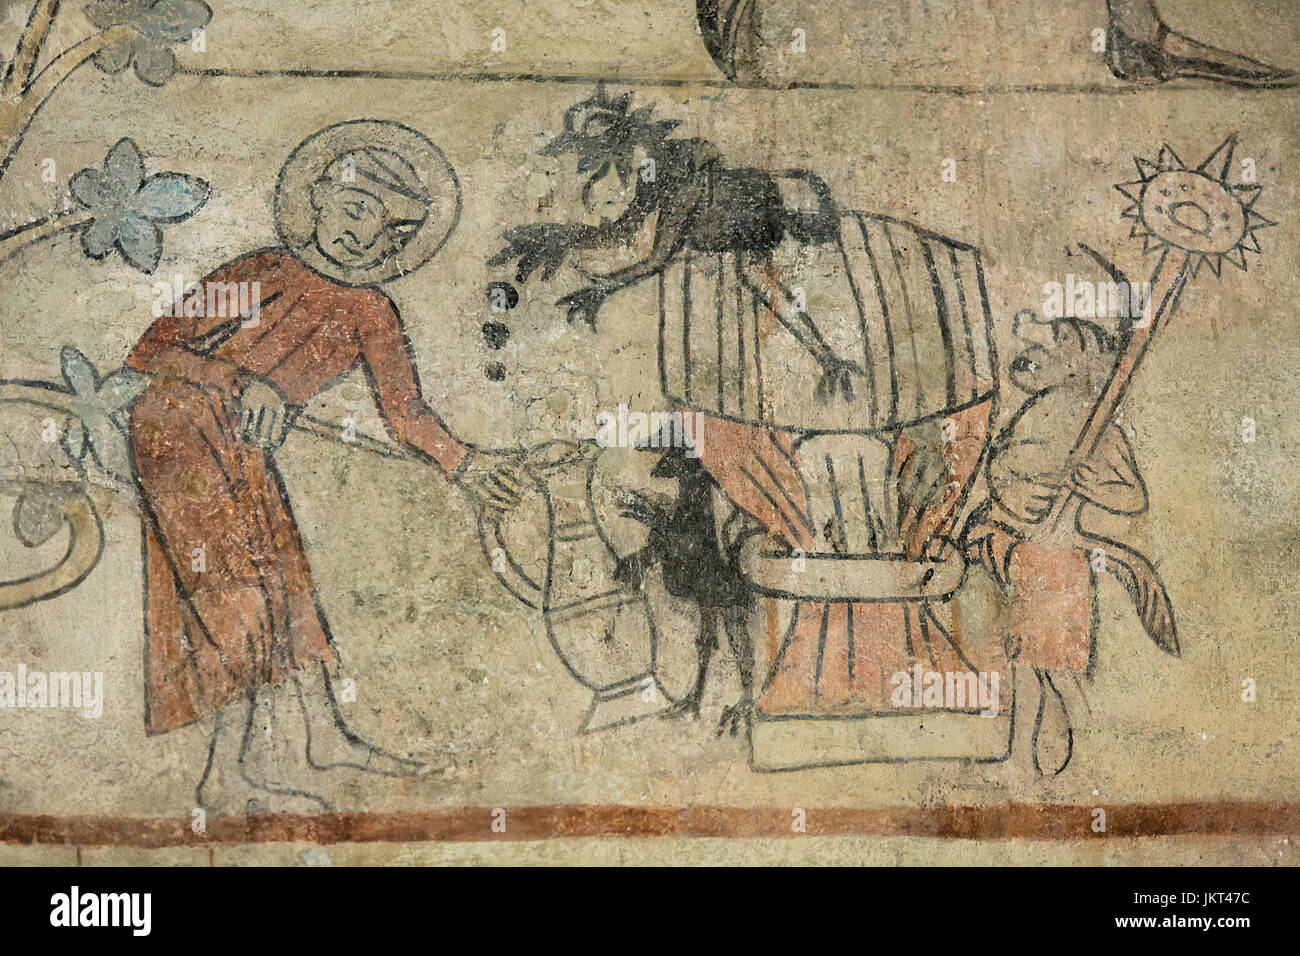 Danish medieval religious fresco from the 14th century in Romanesque style Oerslev Church showing a monk drawing off beer from a keg while devils are  Stock Photo